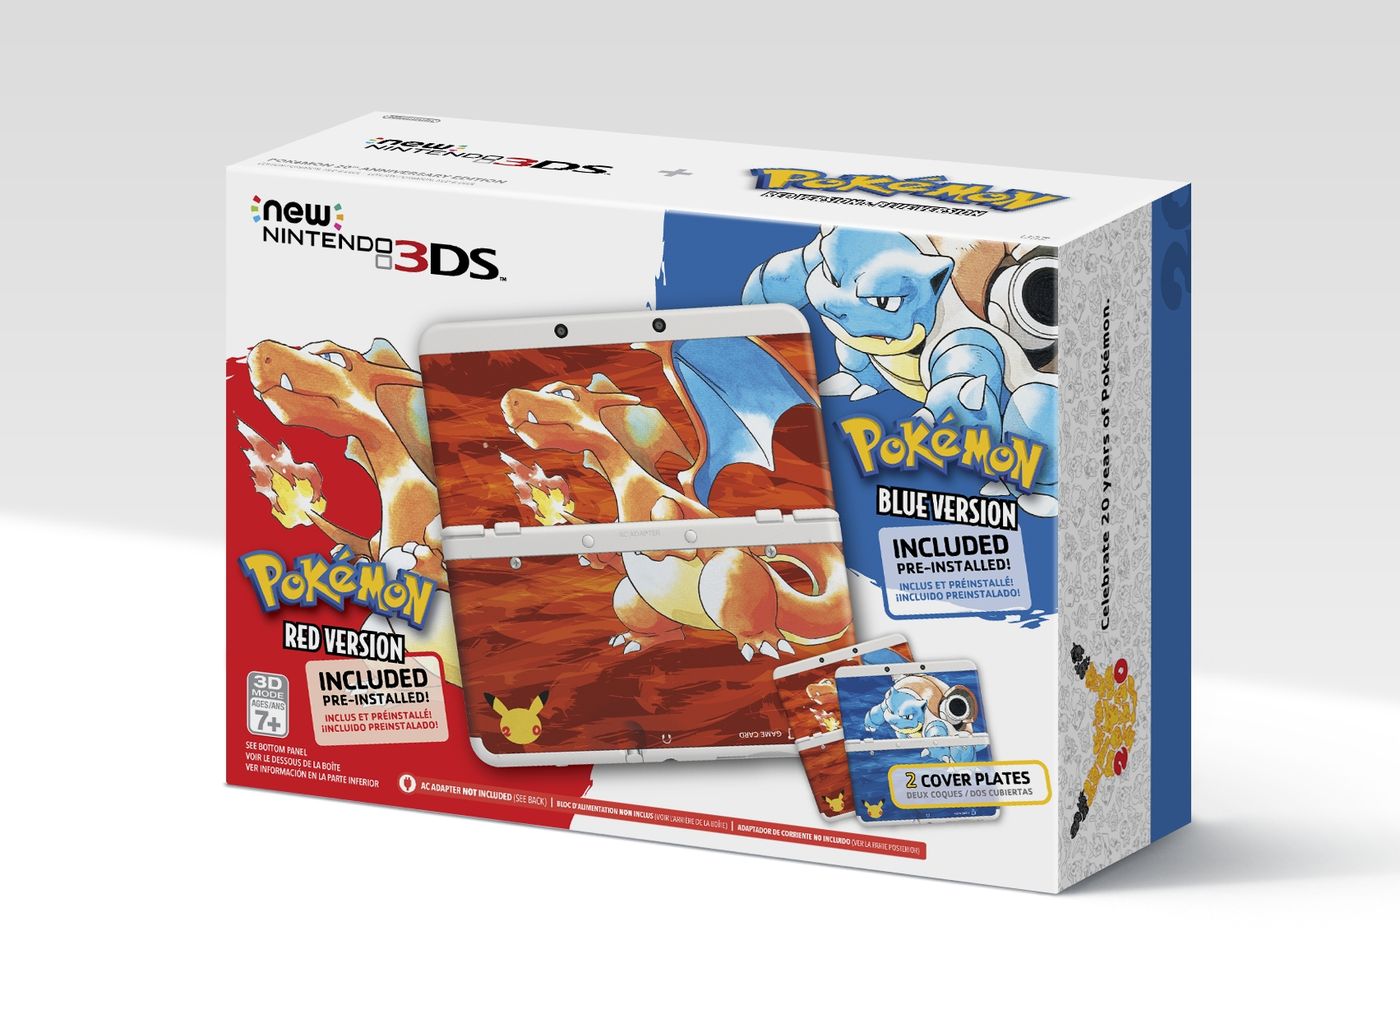 pokemon red and blue version game freak new nintendo 3ds bundle 20th anniversary north america